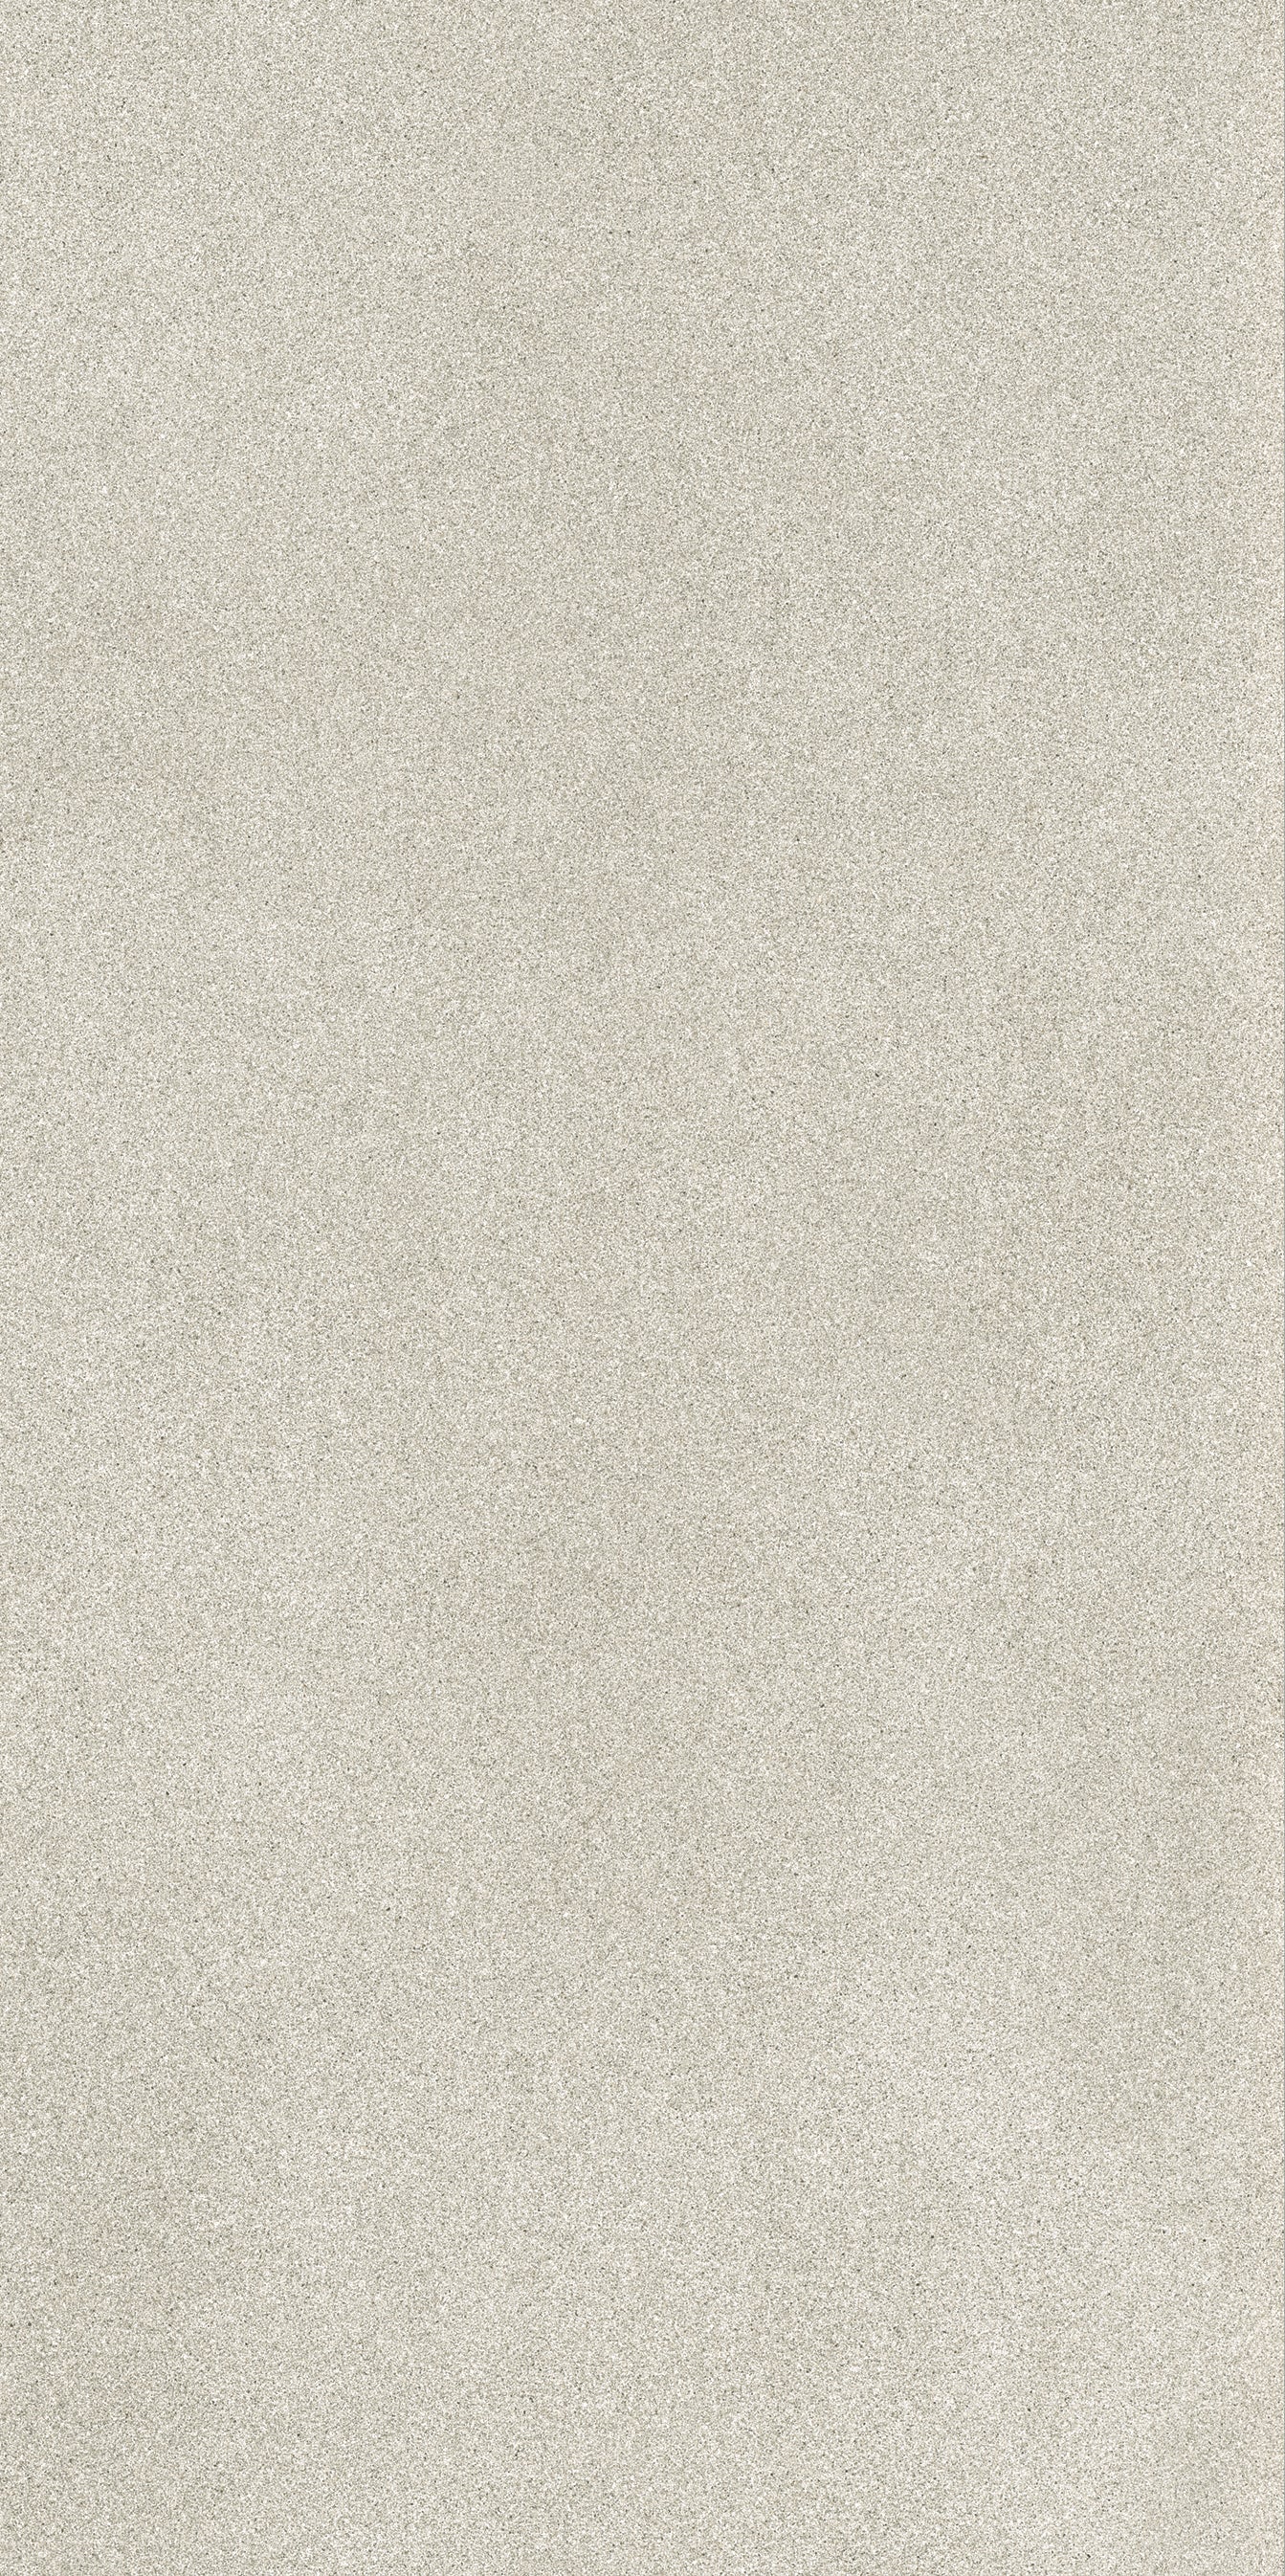 landmark 9mm masterplan precious ivory field tile 24x48x9mm matte rectified porcelain tile distributed by surface group international